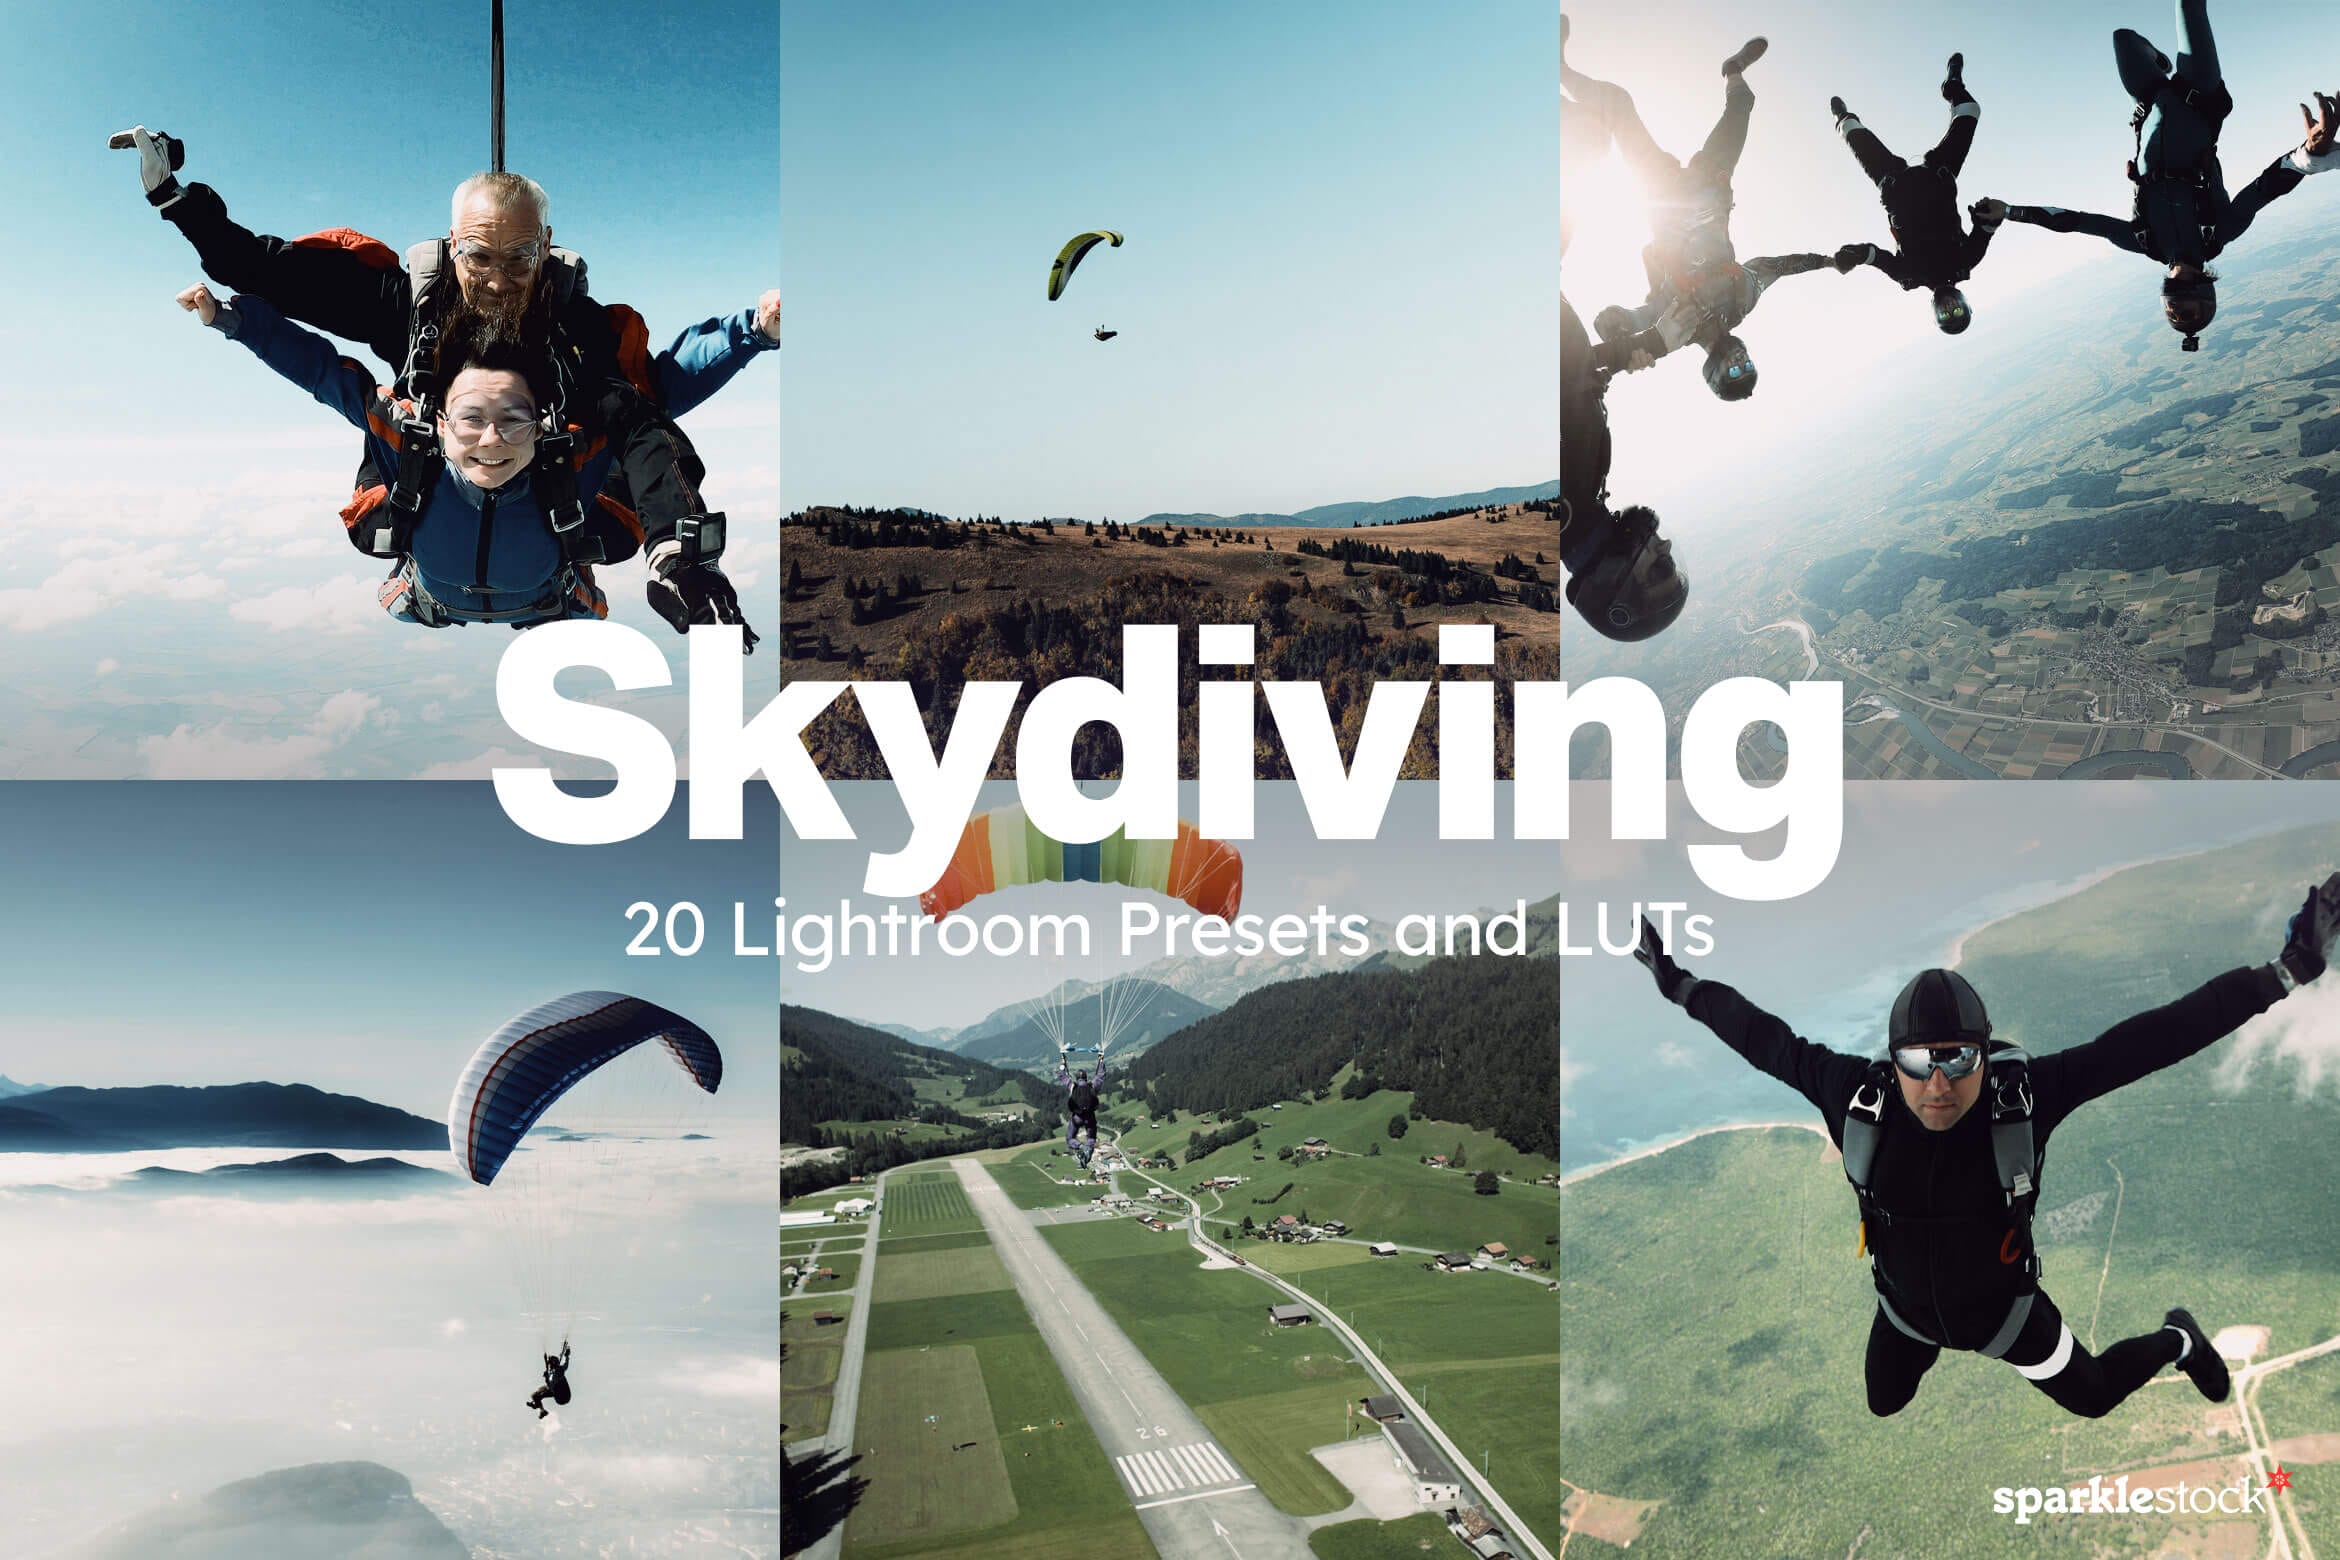 20 Skydiving Lightroom Presets and LUTs